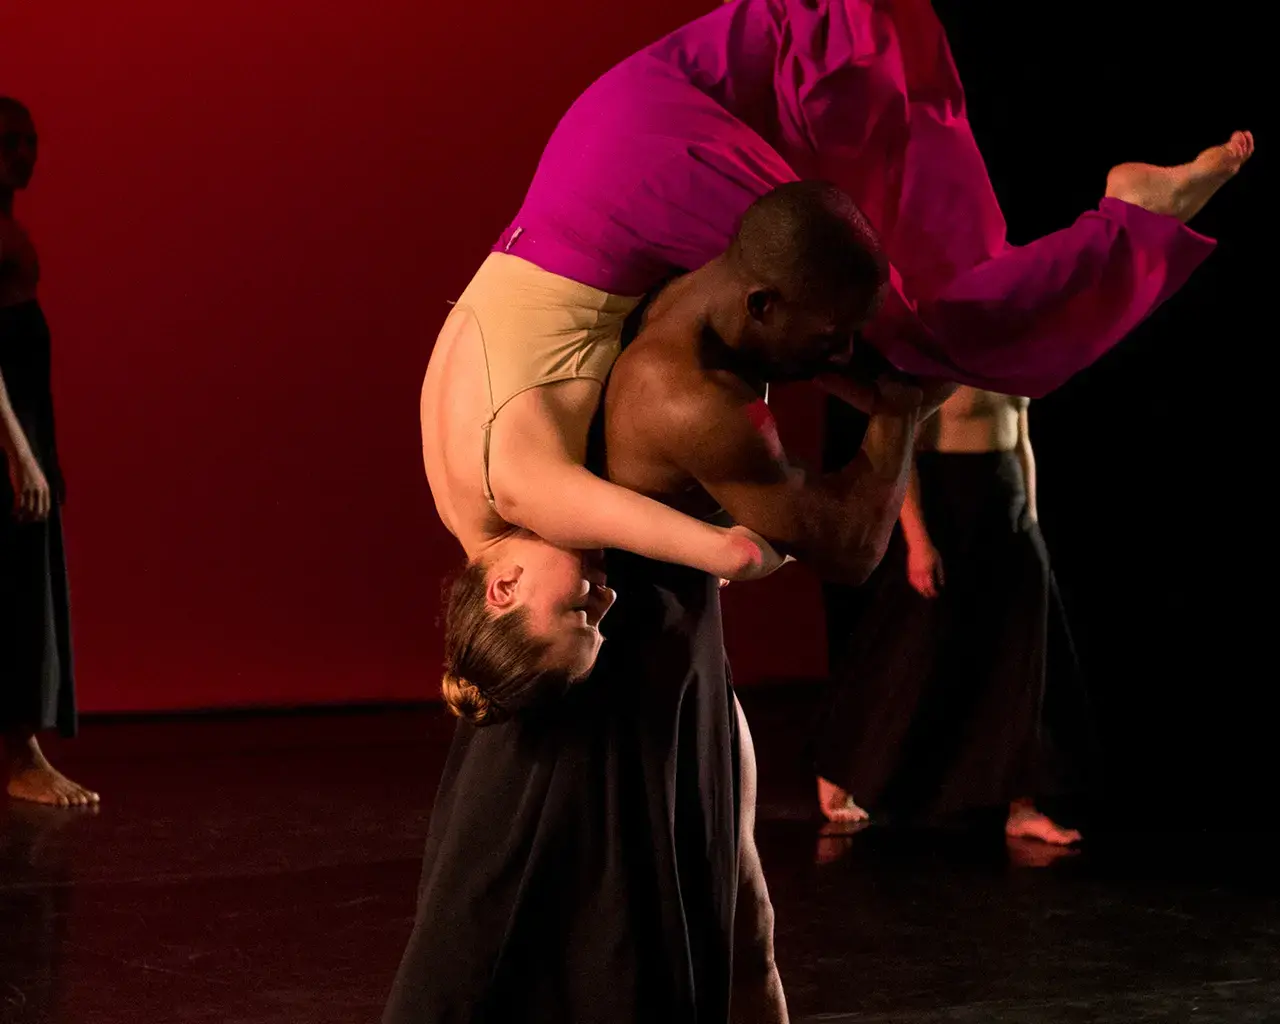 Dance Iquail. Photo by Rachel Neville. Pictured: Iquail Shaheed, Allison Sale, and company.